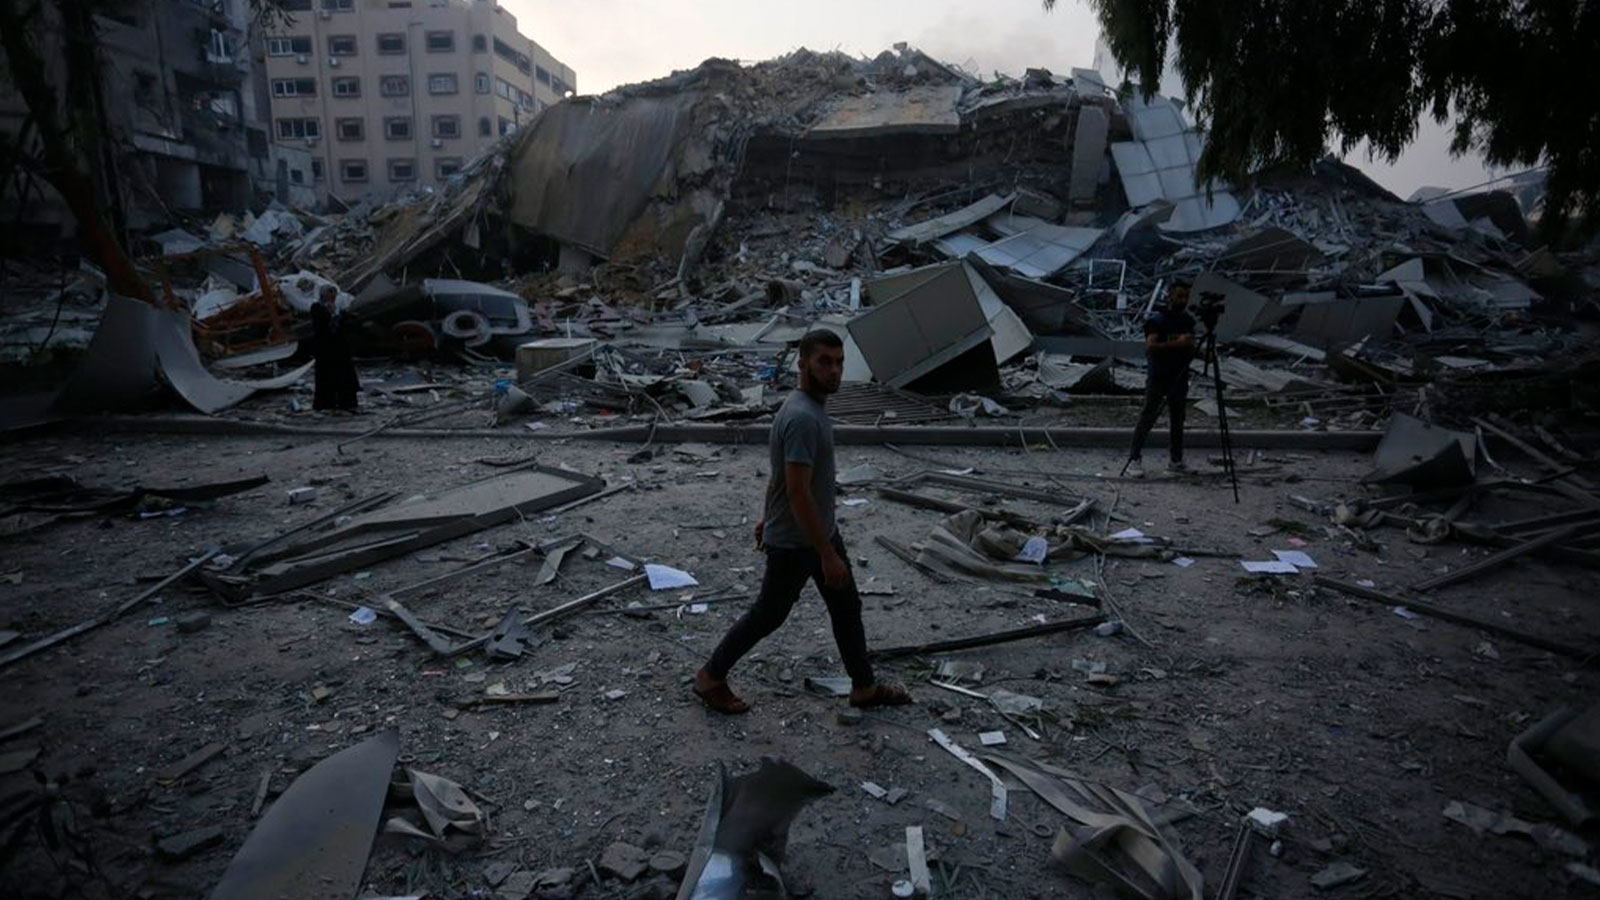 Israeli Bombings Kill 29 United Nations Relief and Works Agency (UNRWA) Workers So Far